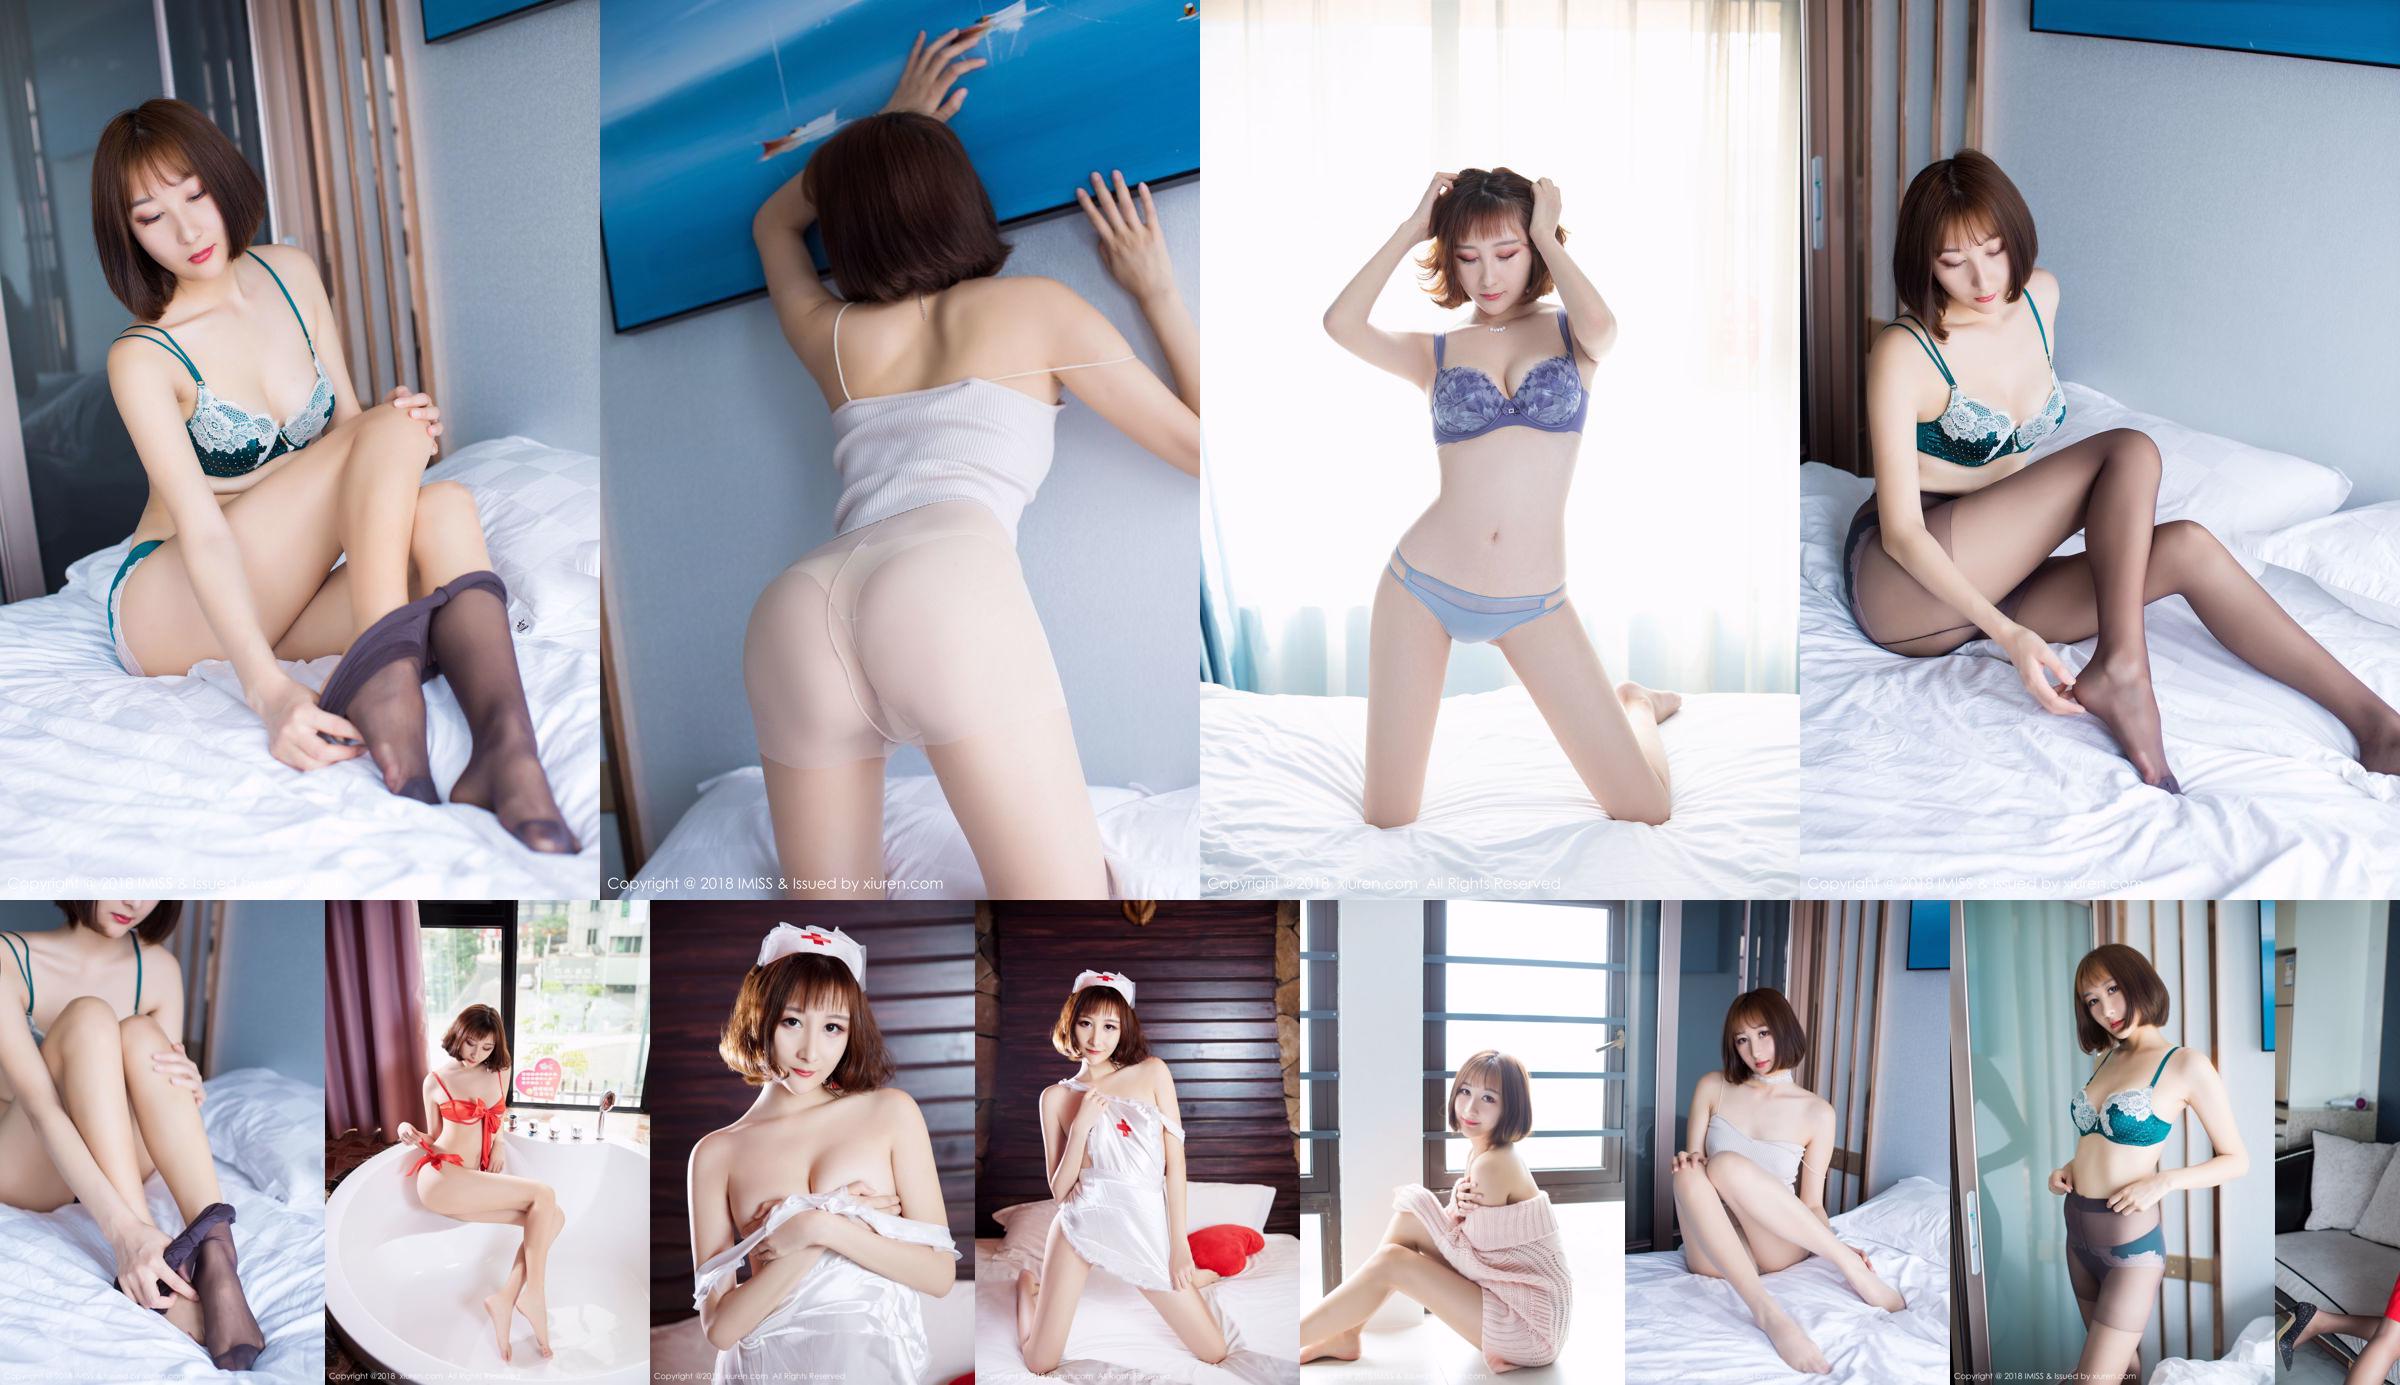 Model @ 九尾 Ivy- "The Ultimate Private Charm" [秀 人 XIUREN] No.1046 No.e21bfc Pagina 1